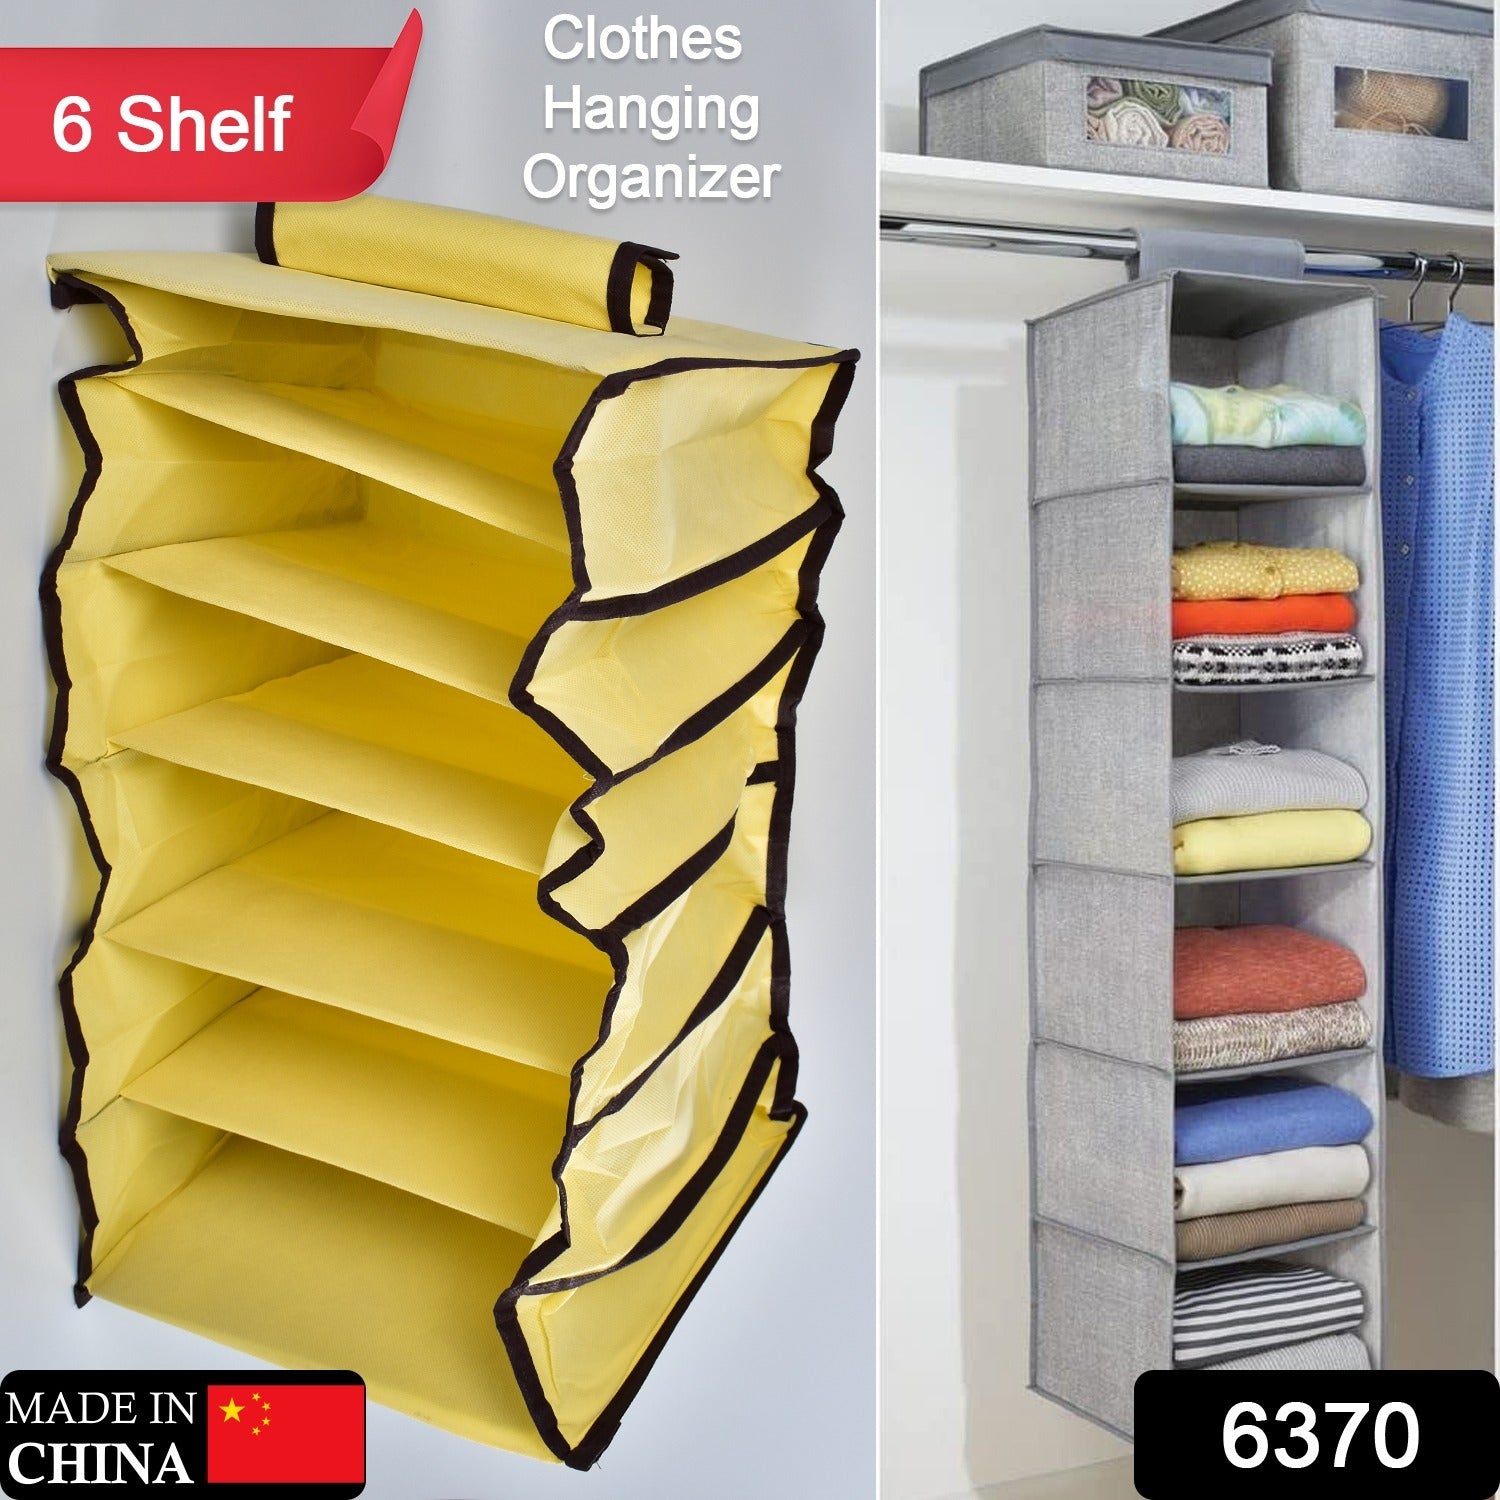 6370  6 Shelf Hanging Closet Organizer, Space Saver, Sweater & Clothing Shelves, Breathable Material Keeps Away Dust & Odors, 